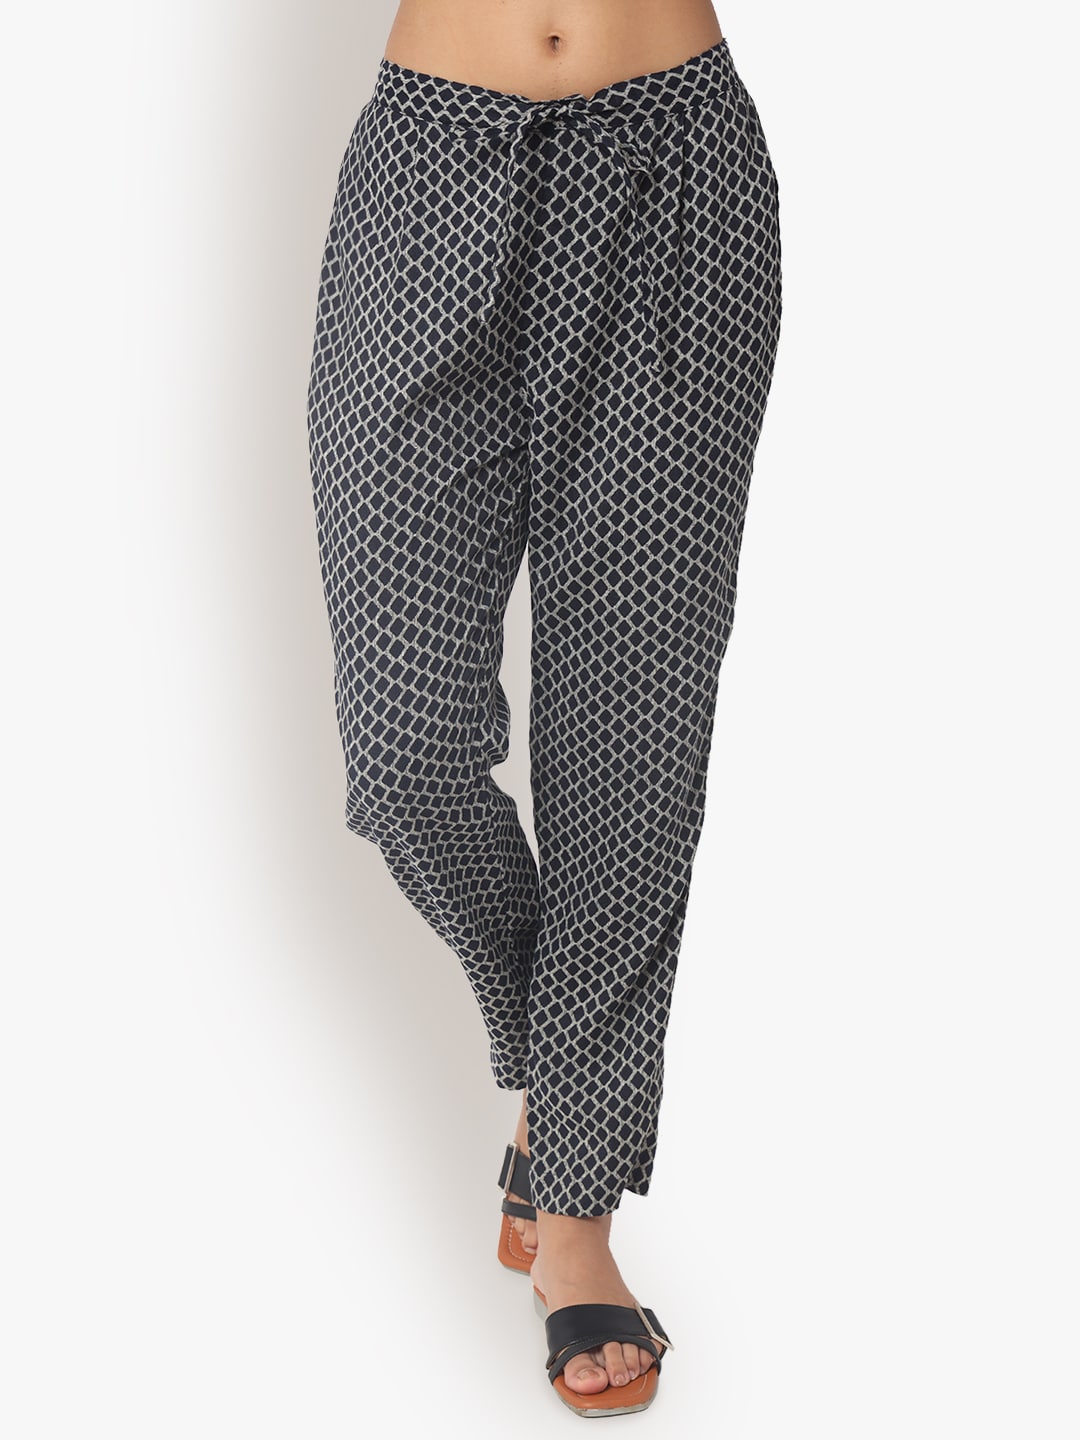 Patterned trousers - Navy blue/Patterned - Ladies | H&M IN